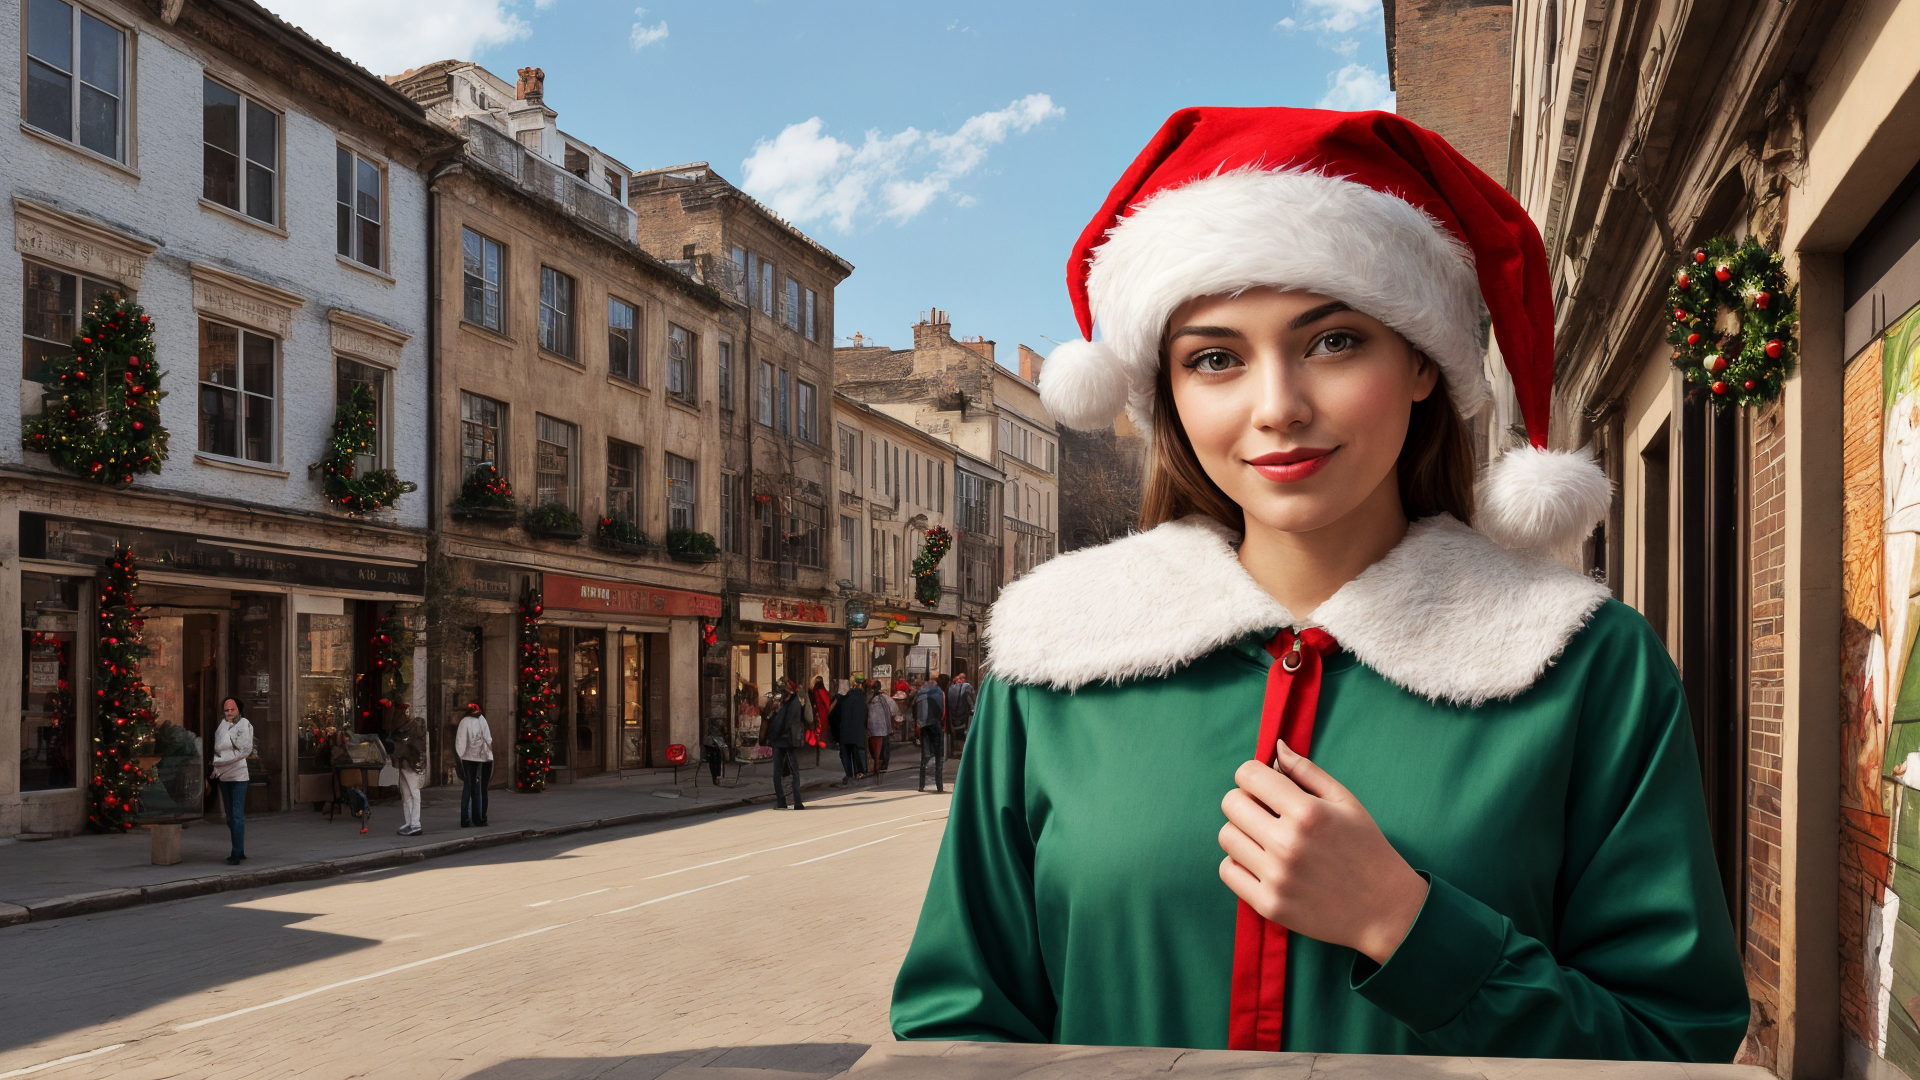 General 1920x1080 AI art Christmas Christmas clothes sky looking at viewer clouds Santa hats building sunlight fur trim fur women closed mouth smiling long sleeves Christmas ornaments  people sidewalks